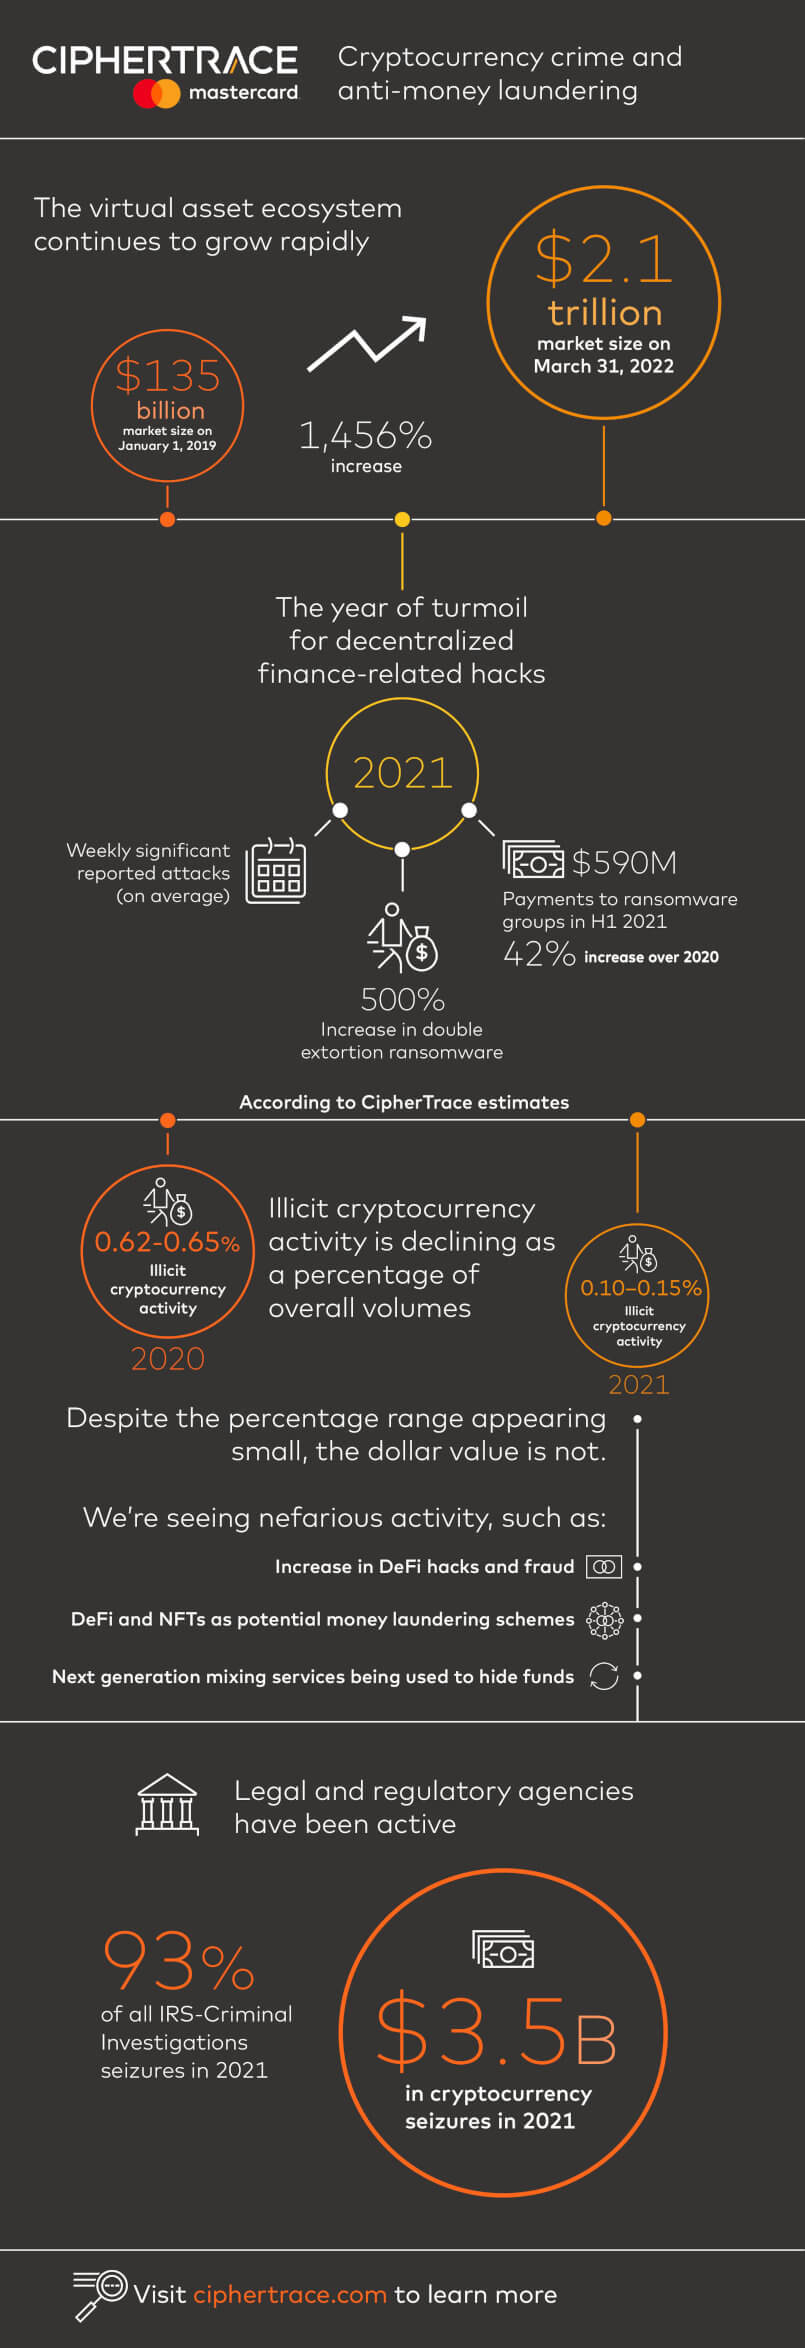 CipherTrace report shows a decline in illicit activity in the crypto ecosystem